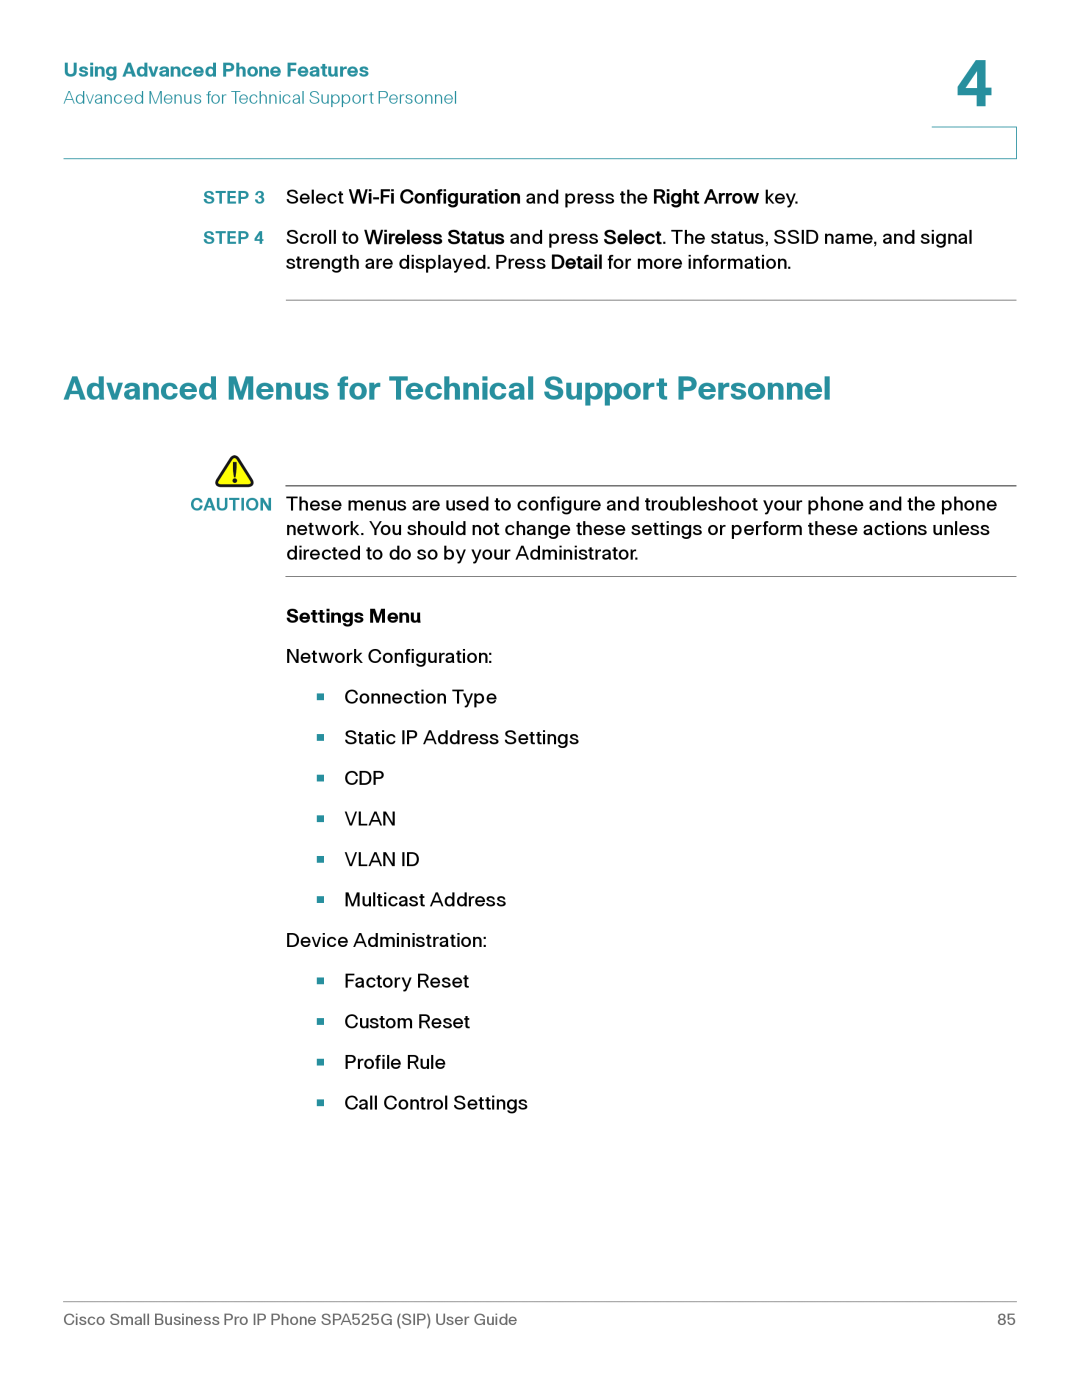 Cisco Systems SPA525G manual Advanced Menus for Technical Support Personnel, Using Advanced Phone Features, Settings Menu 